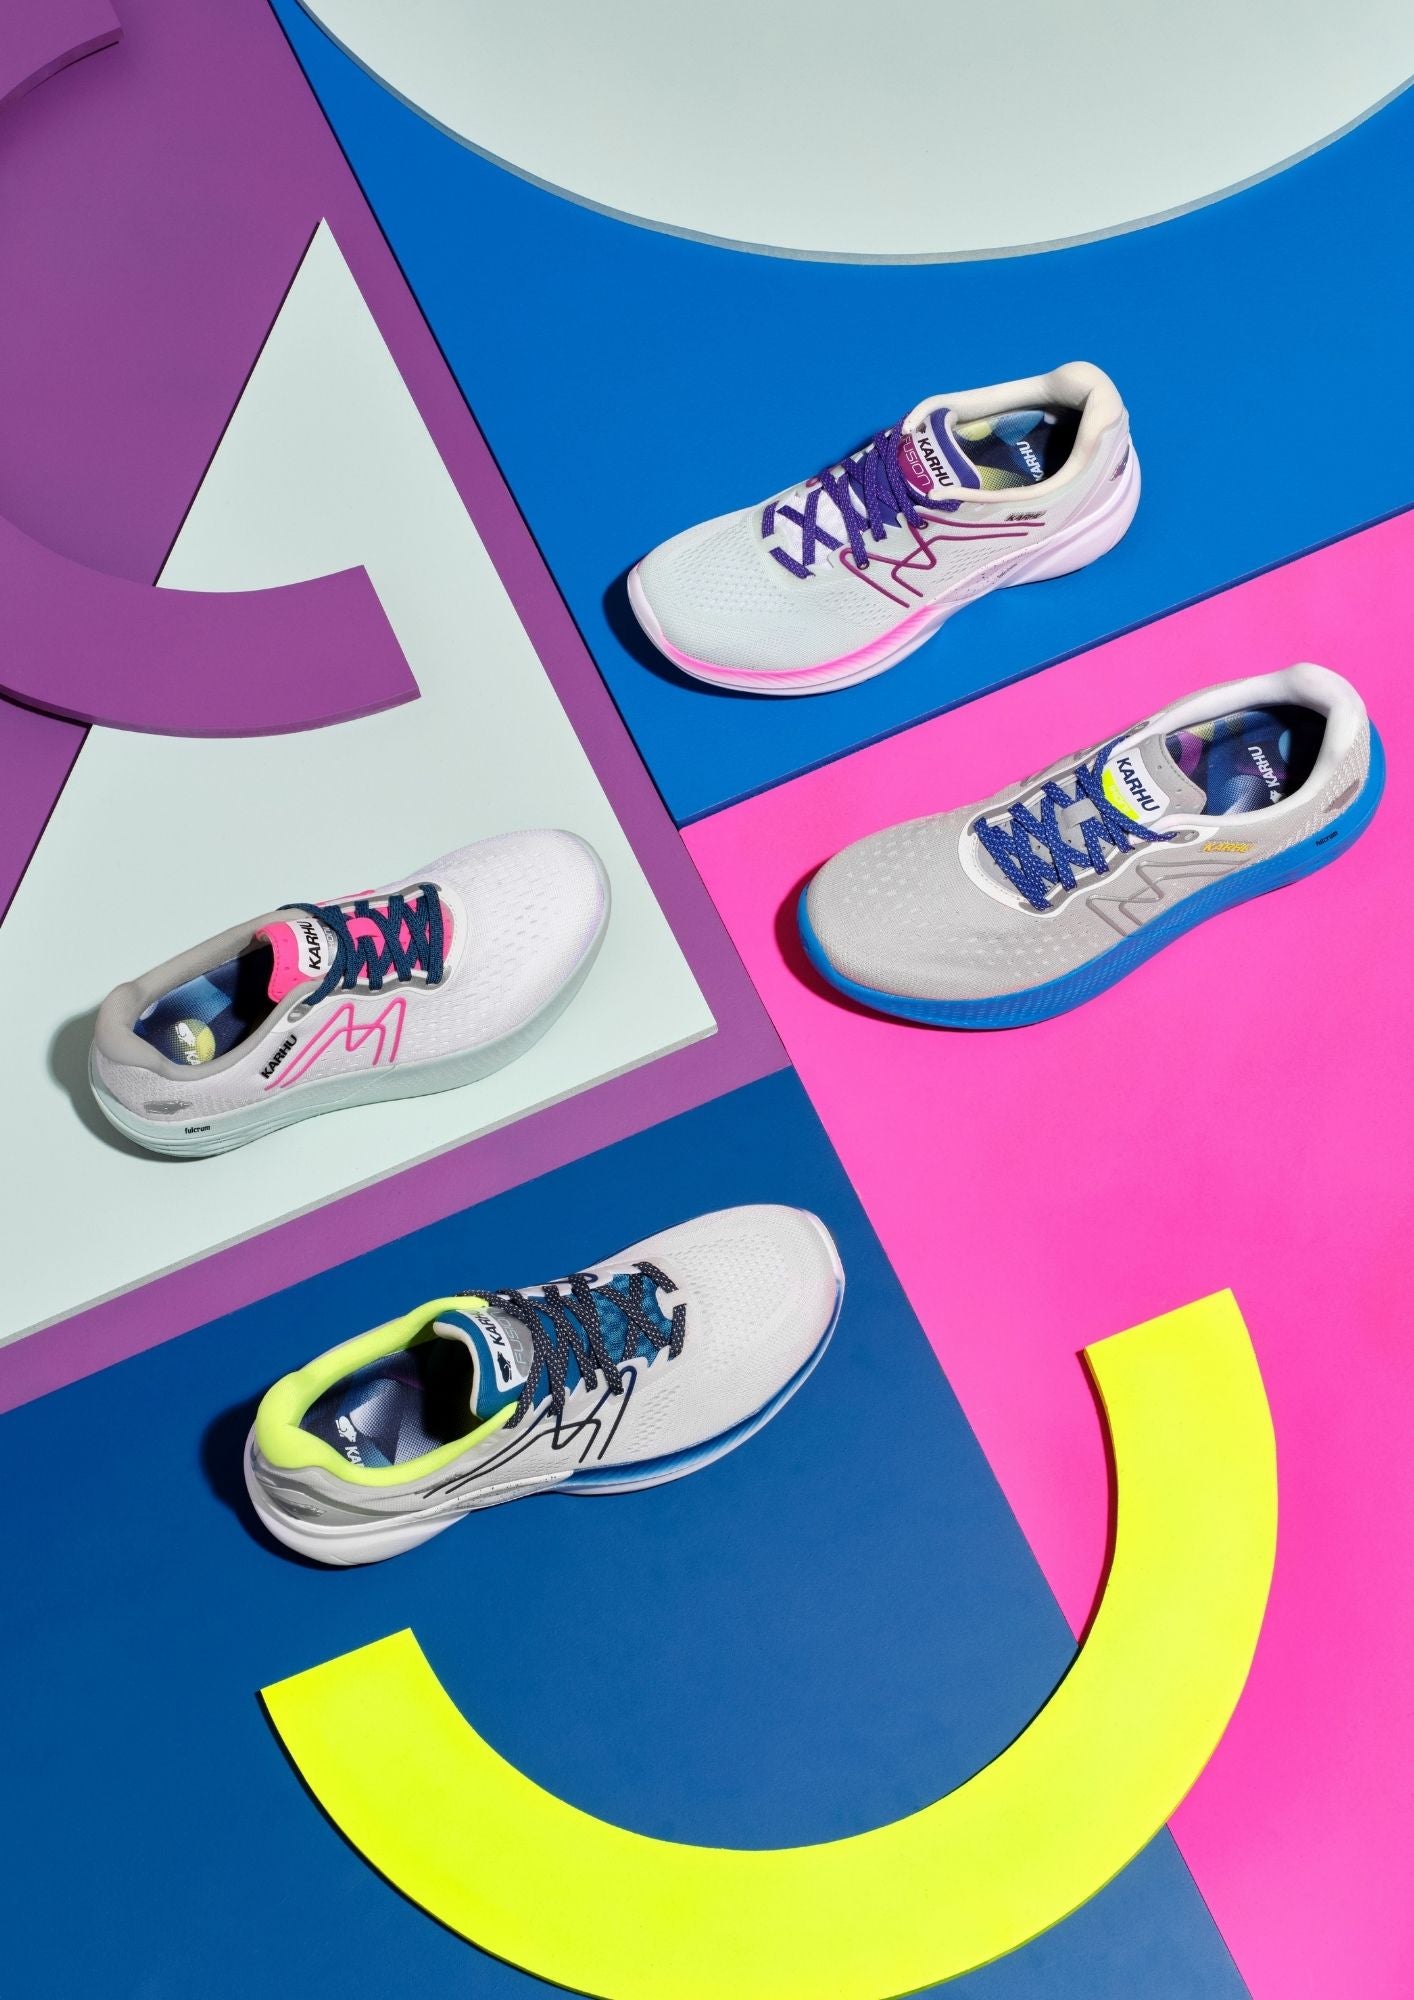 KARHU CELEBRATES 90s SPORT FASHION WITH THE NEON PACK